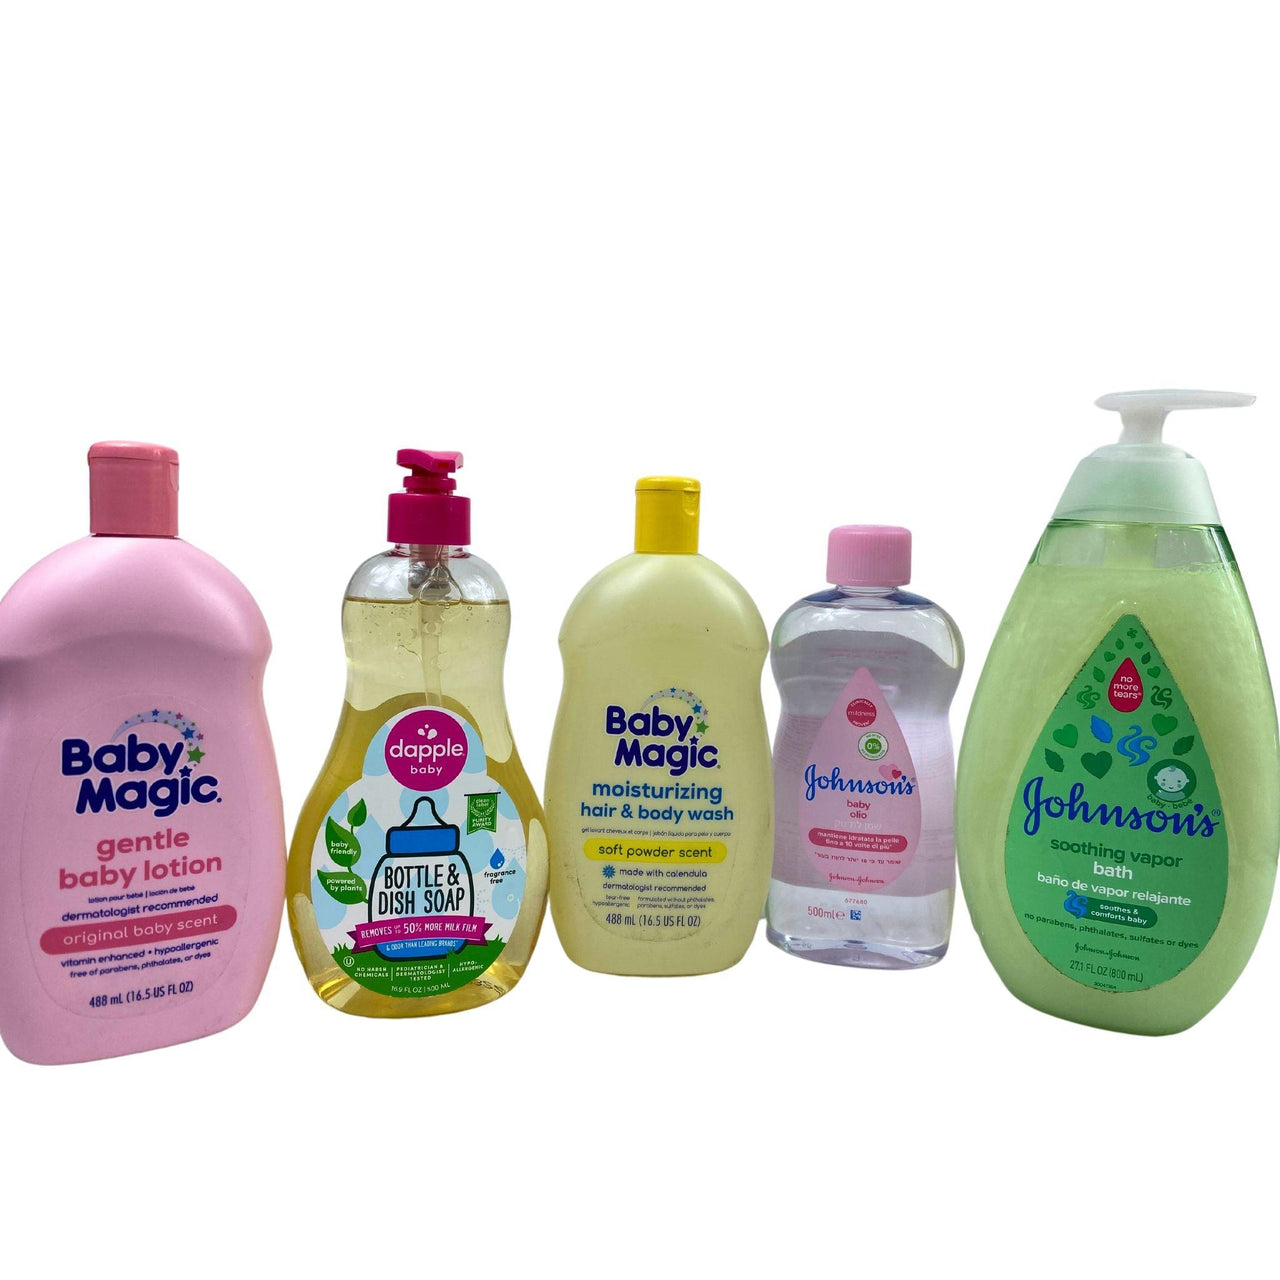 Baby Products Assorted Mix Includes Lotions,Dish Soap,Baby Oil,Butt Paste (50 Pcs Lot) - Discount Wholesalers Inc